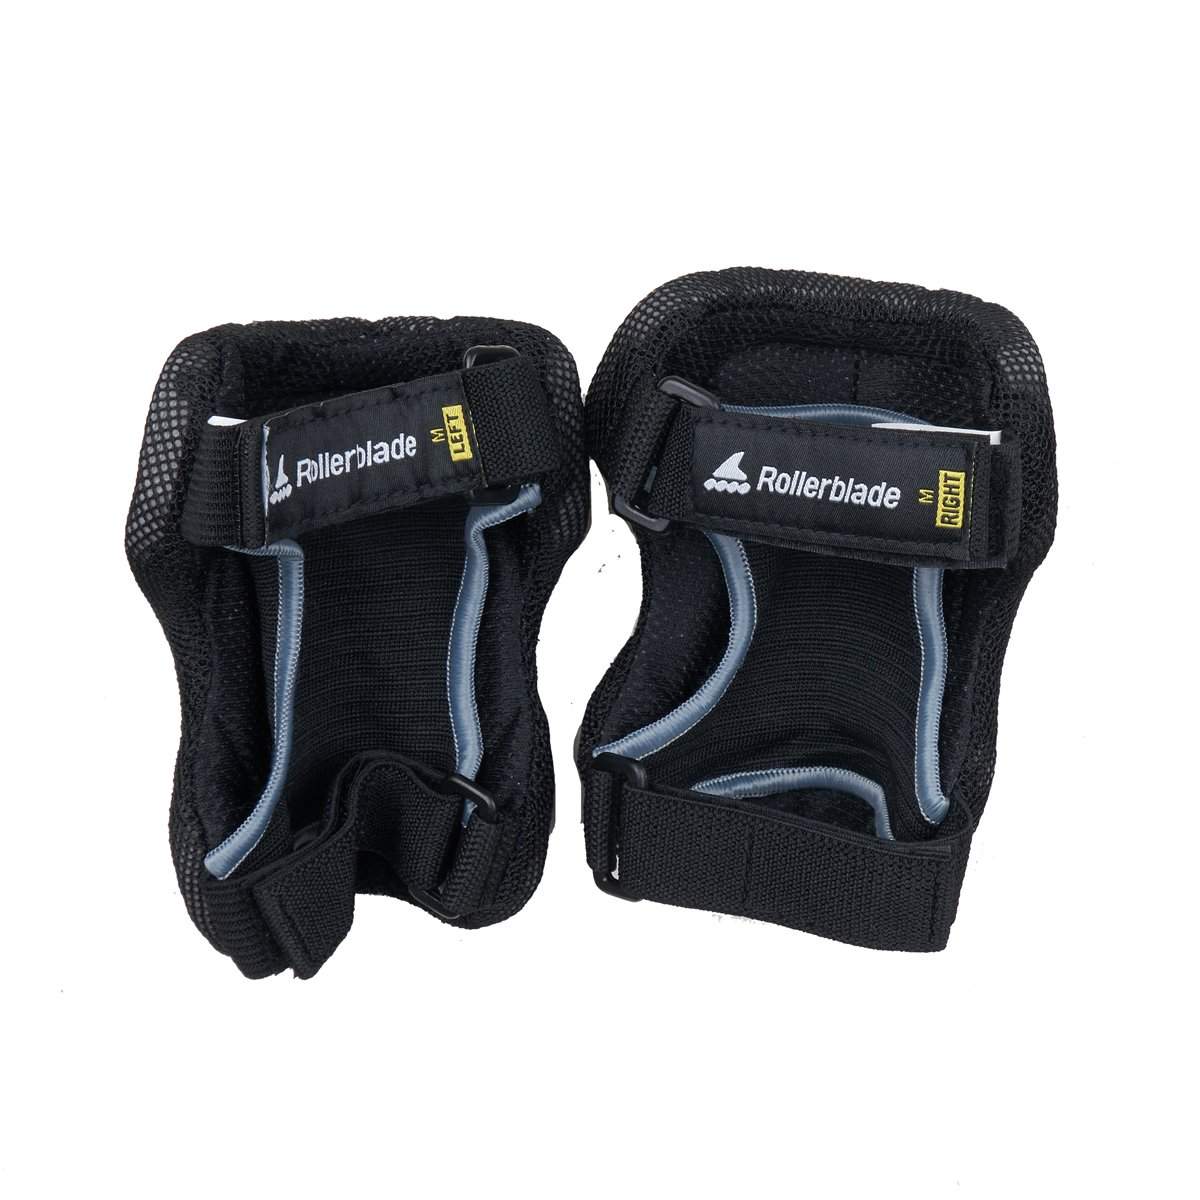 Rollerblade Skate Gear Elbow pad - Black-Rollerblade-black,Elbow pads,Oct-New,Protective Gear,white